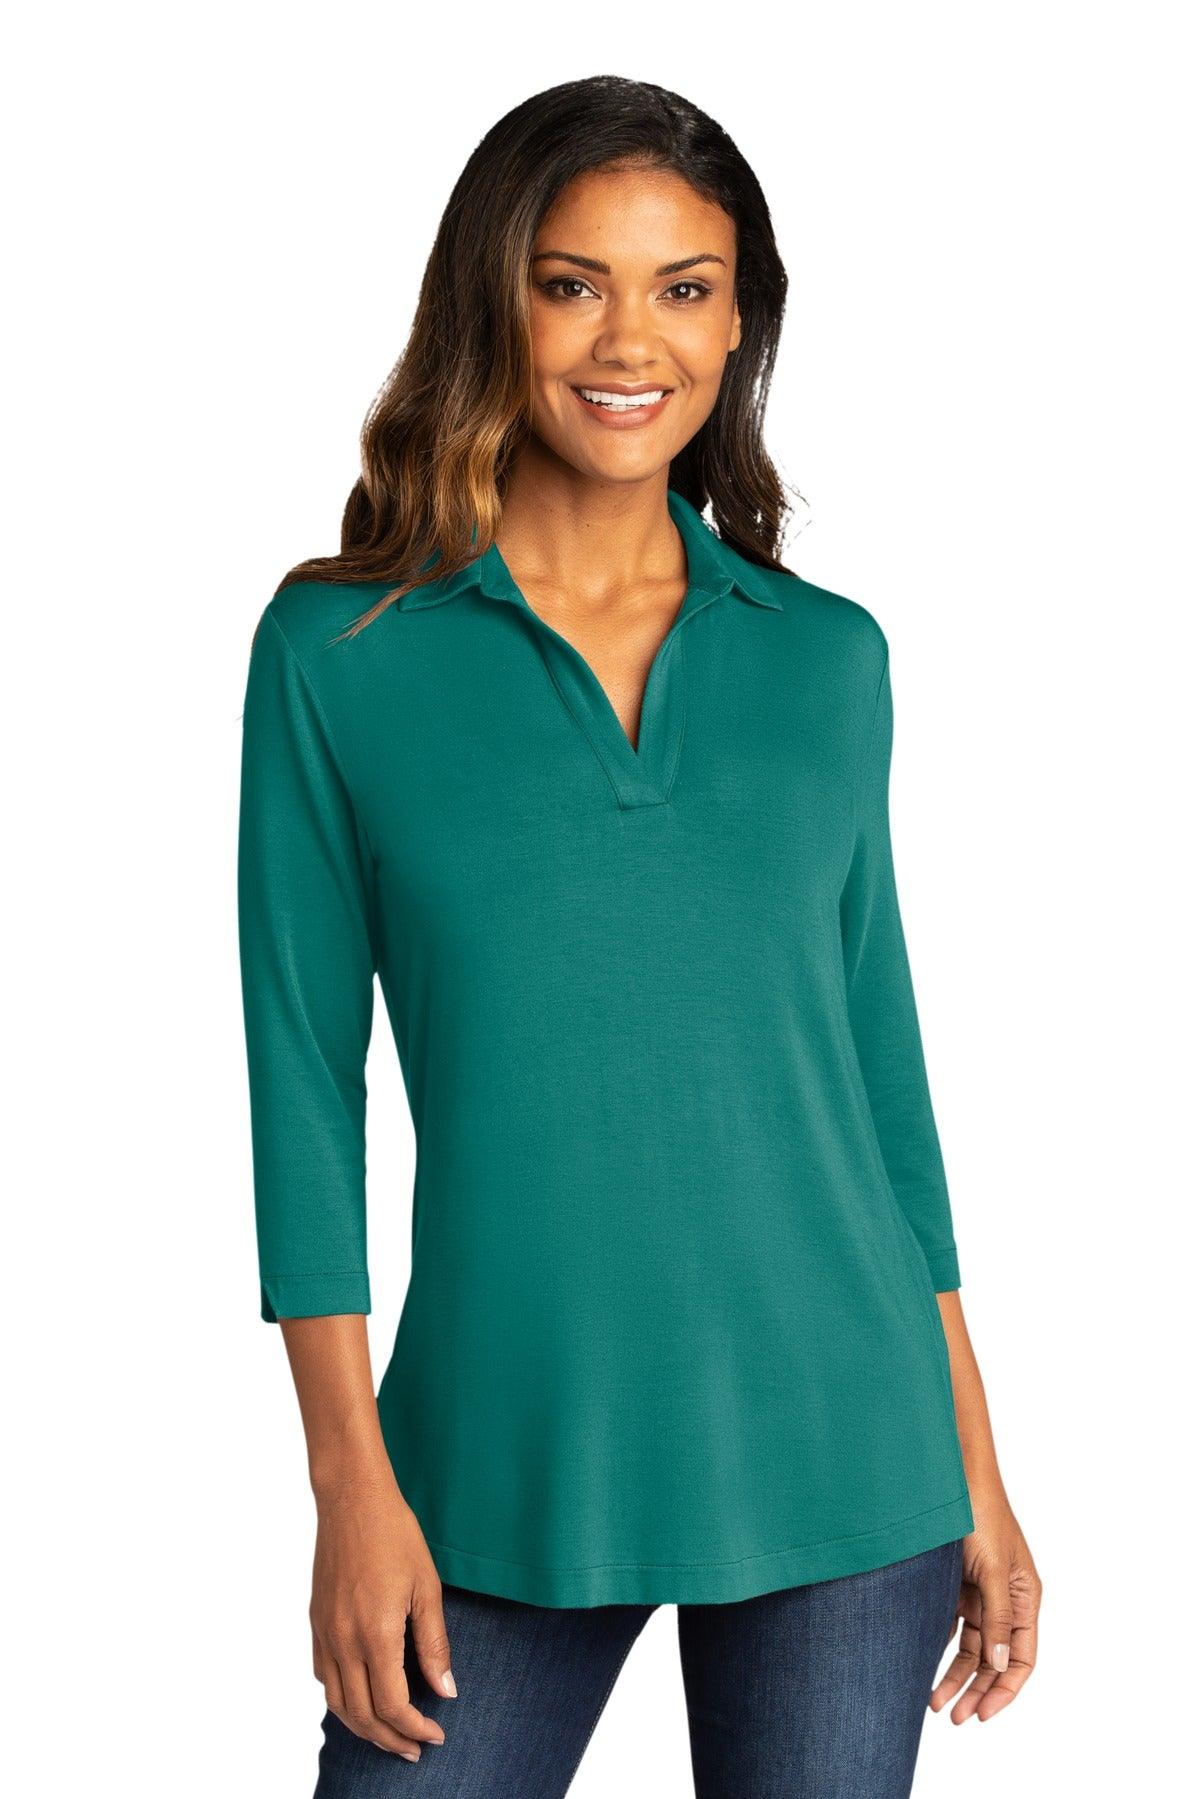 Port Authority Ladies Luxe Knit Tunic. LK5601 - Dresses Max